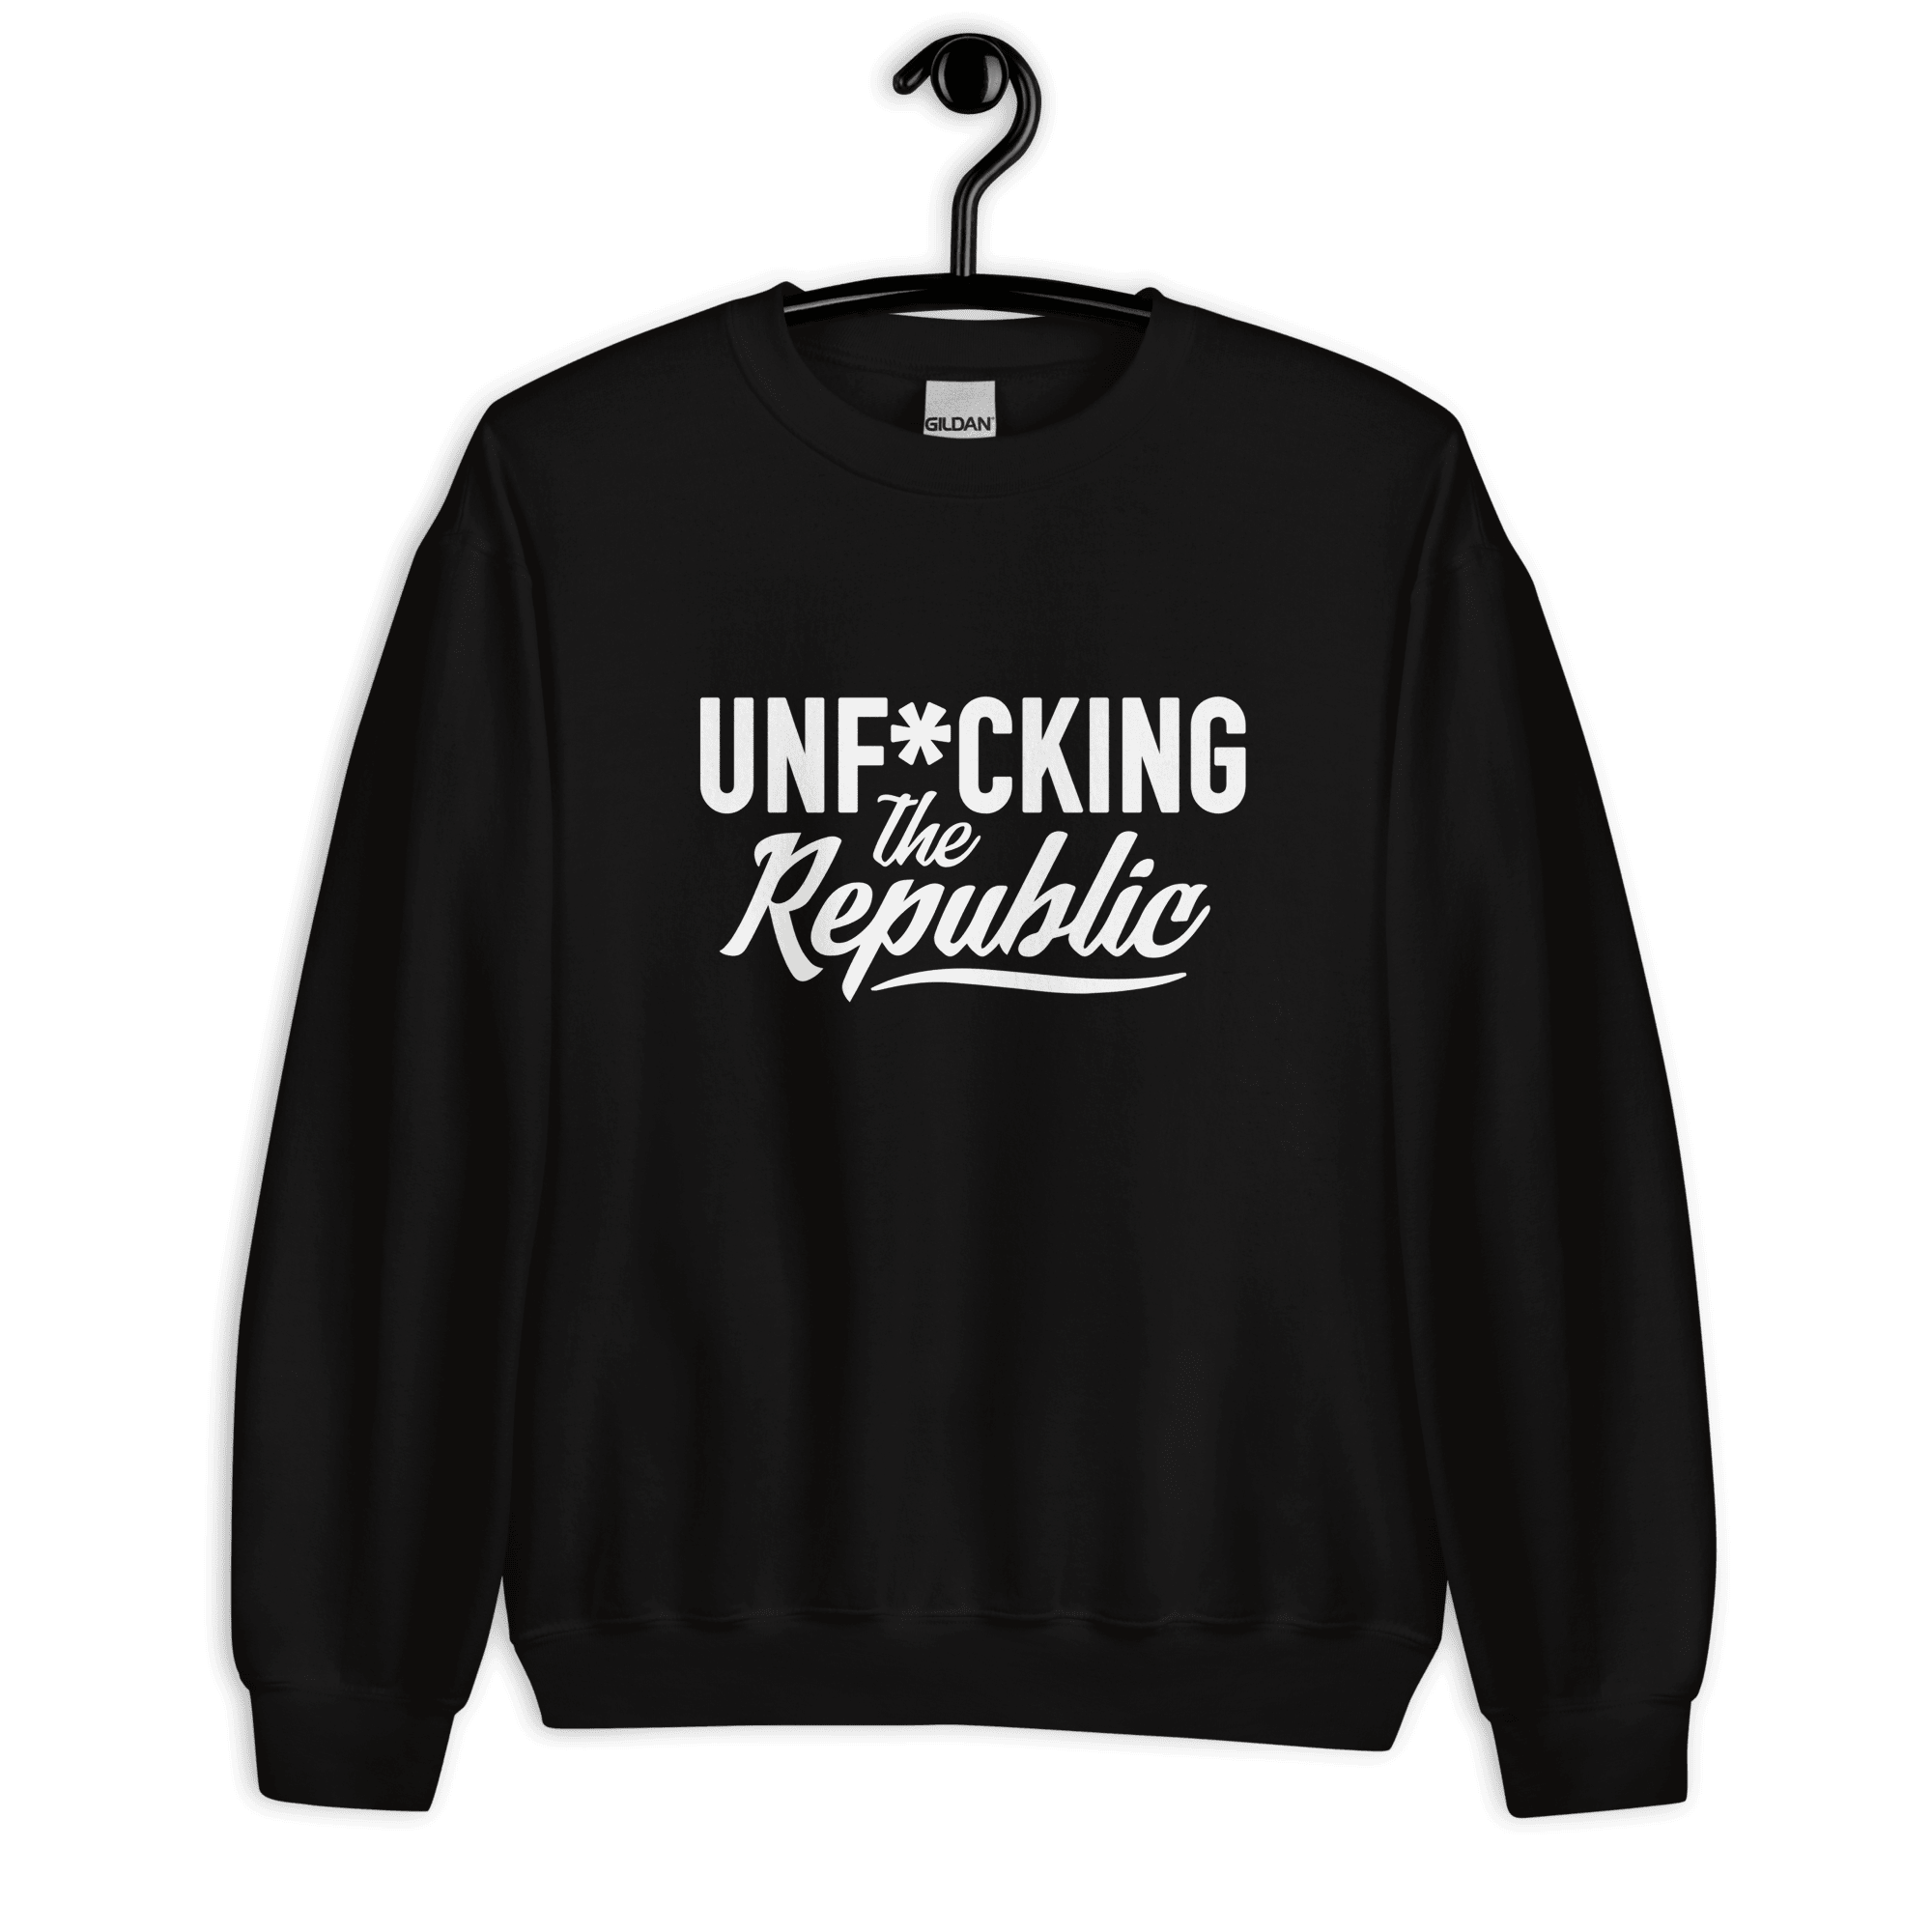 Black crew neck with white logo that say Unf*cking The Republic